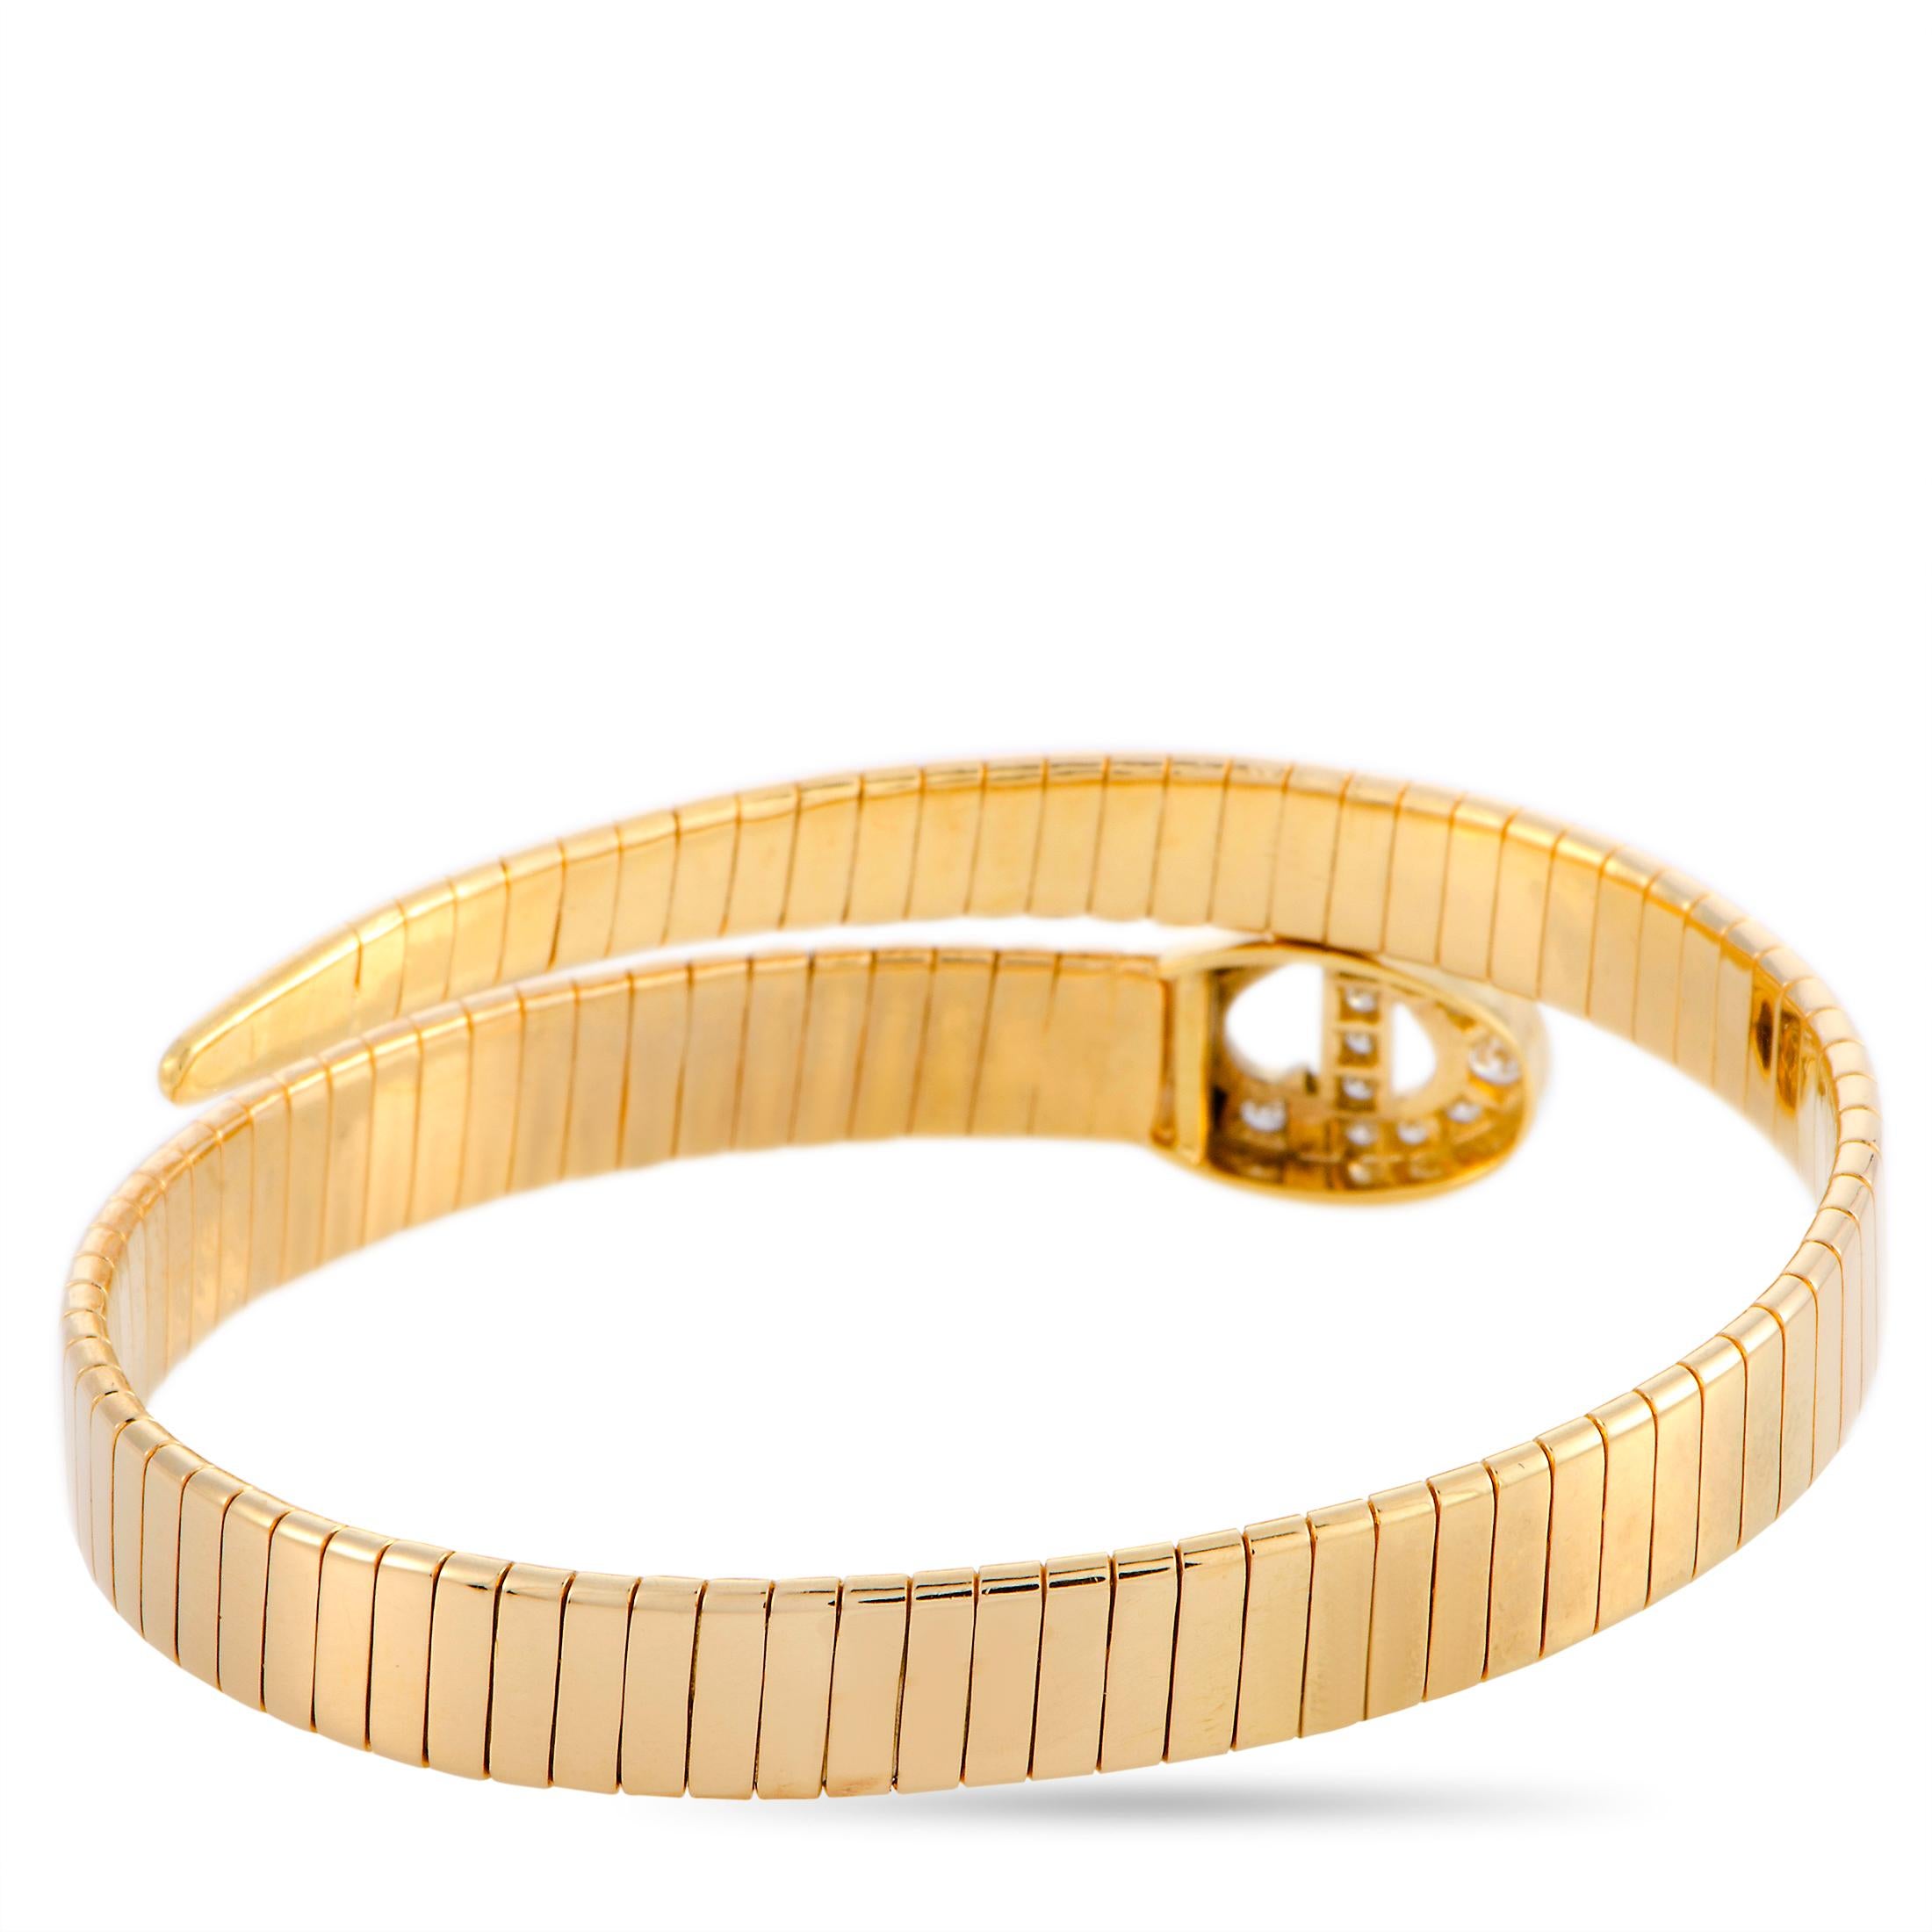 This Dior bracelet is made out of 18K yellow gold and diamonds and weighs 35.2 grams, measuring 7” in length with a 2.25” diameter.

The bracelet is offered in estate condition and includes the manufacturer’s box.